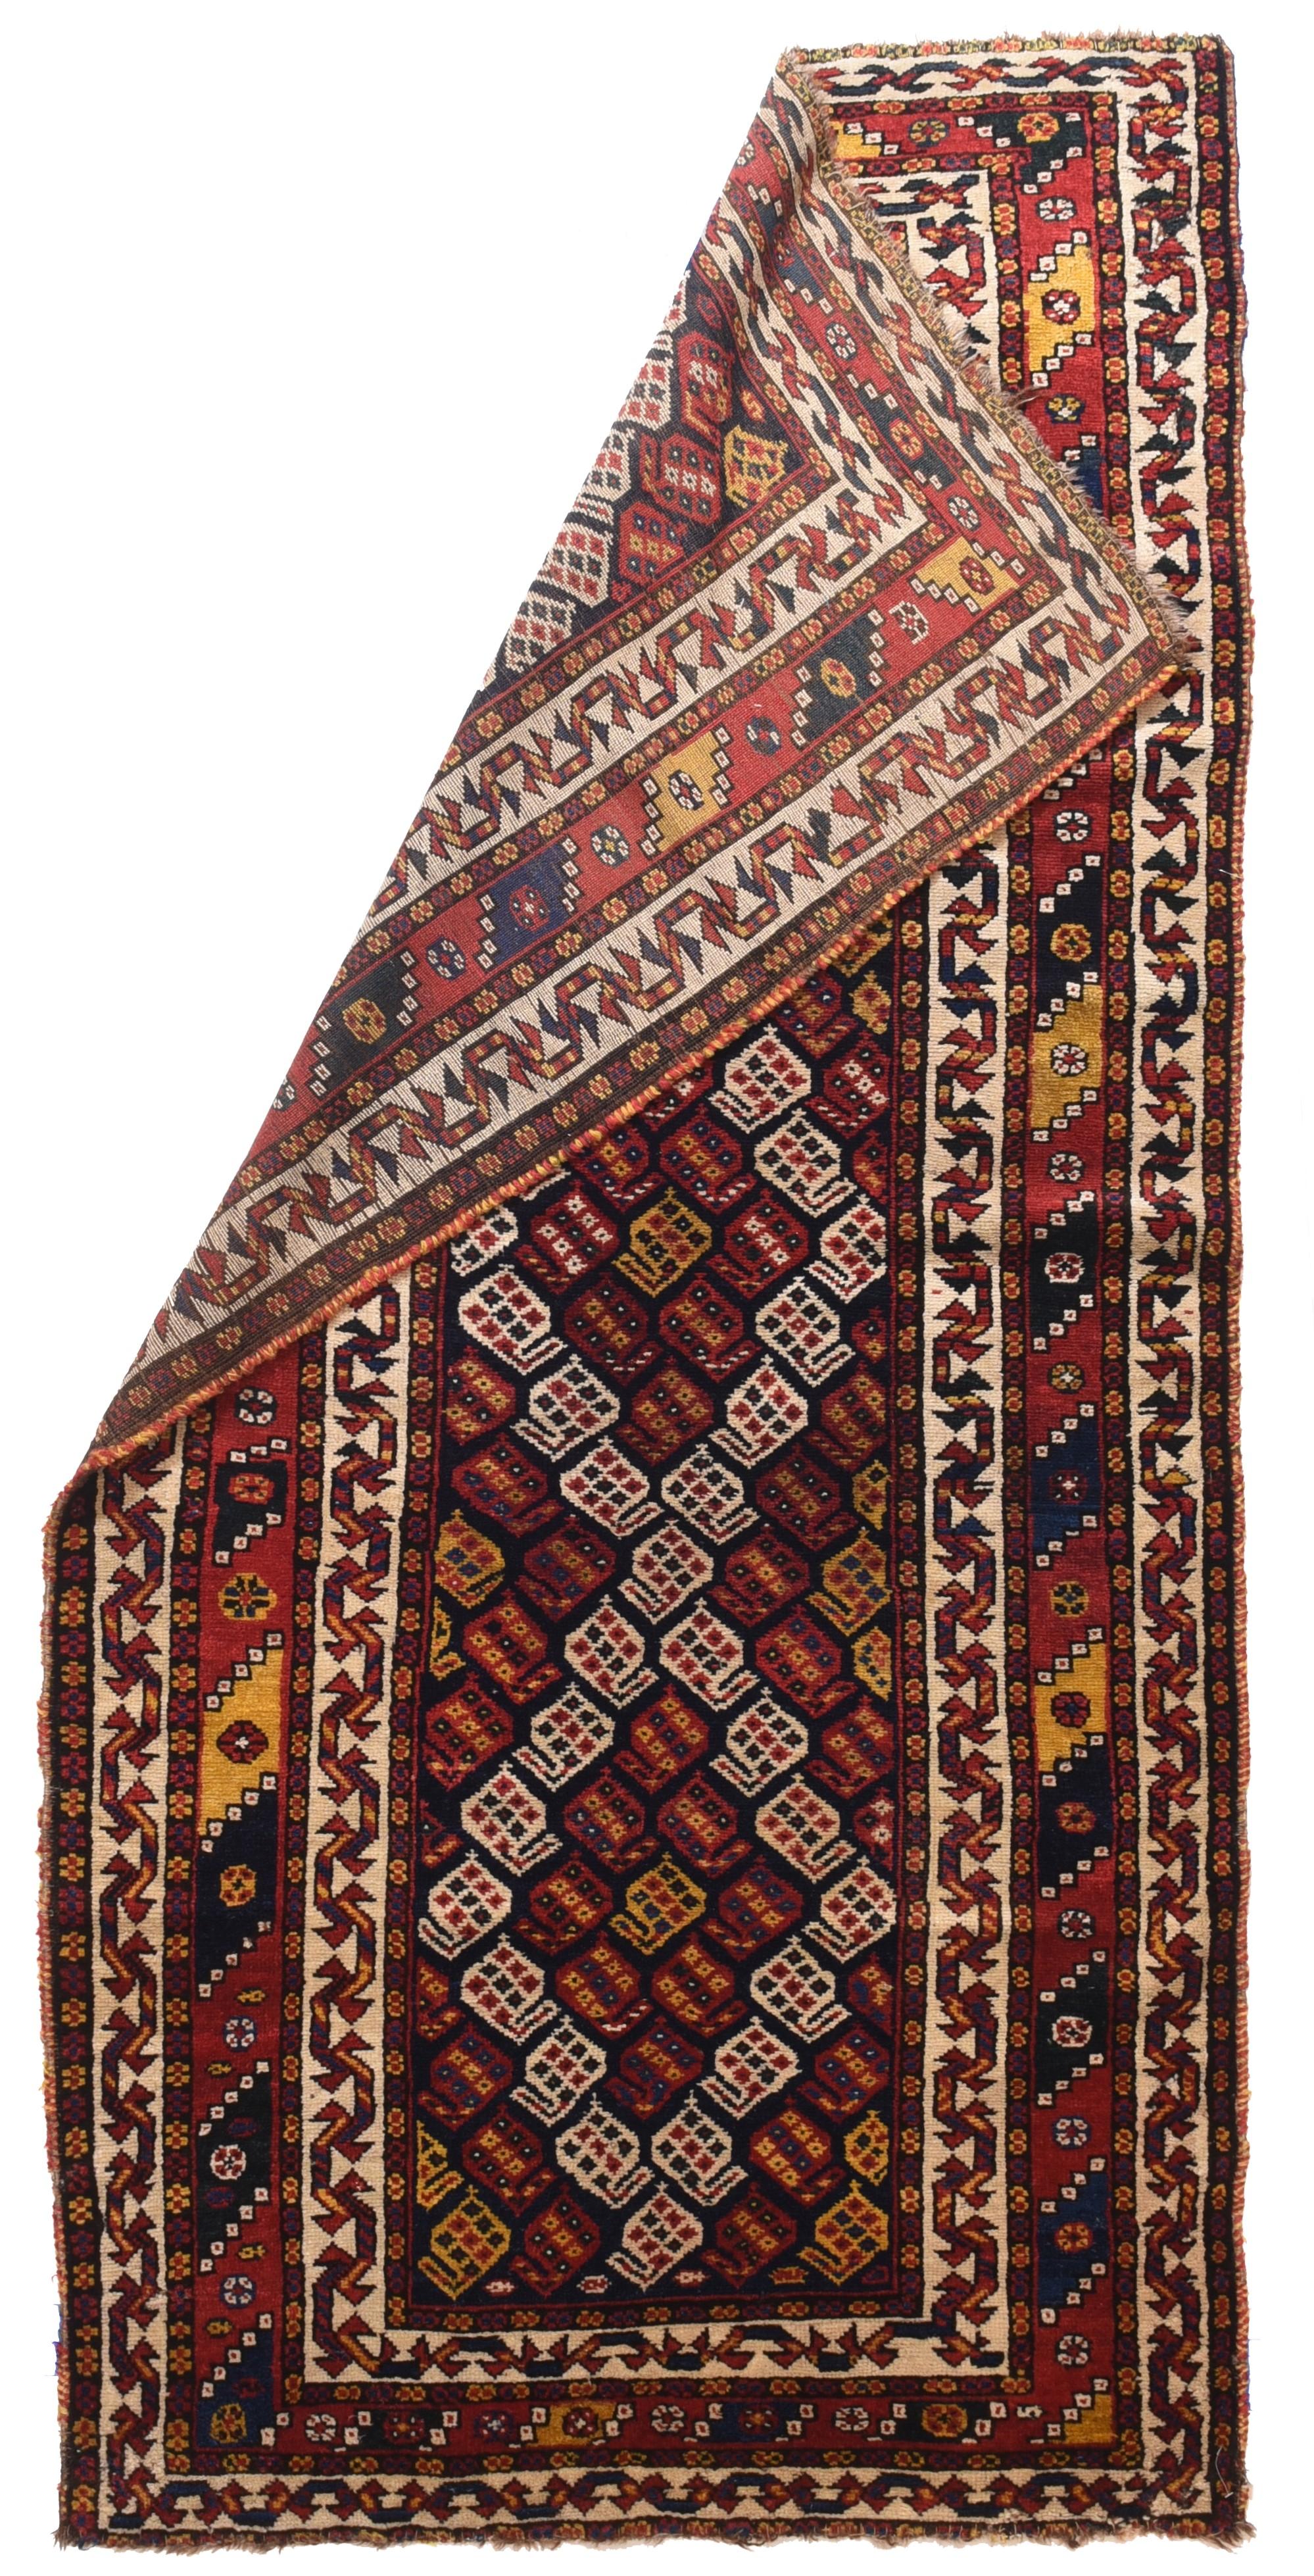 Antique Lori Tribal Rug 3'10'' x 7'8''. From SW Persia, and from either the Luri or Khamseh tribal groups, this well-coloured, naturally paletted piece shows a row reversing boteh pattern with a three connected lozenge over-pattern in ivory. Botehs